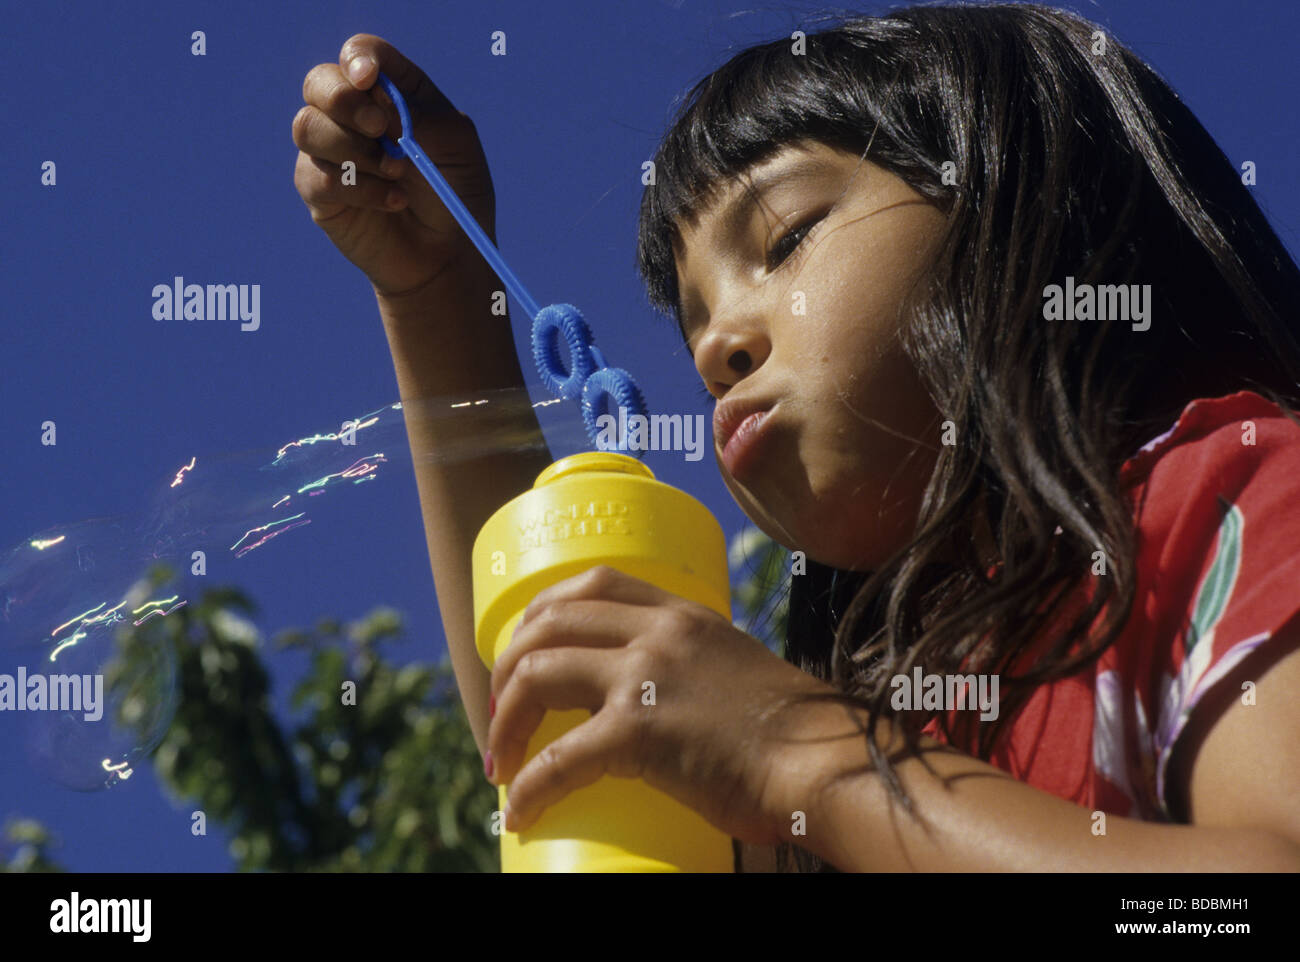 7 yr. old girl of Hispanic/Native American descent blowing bubbles Stock Photo